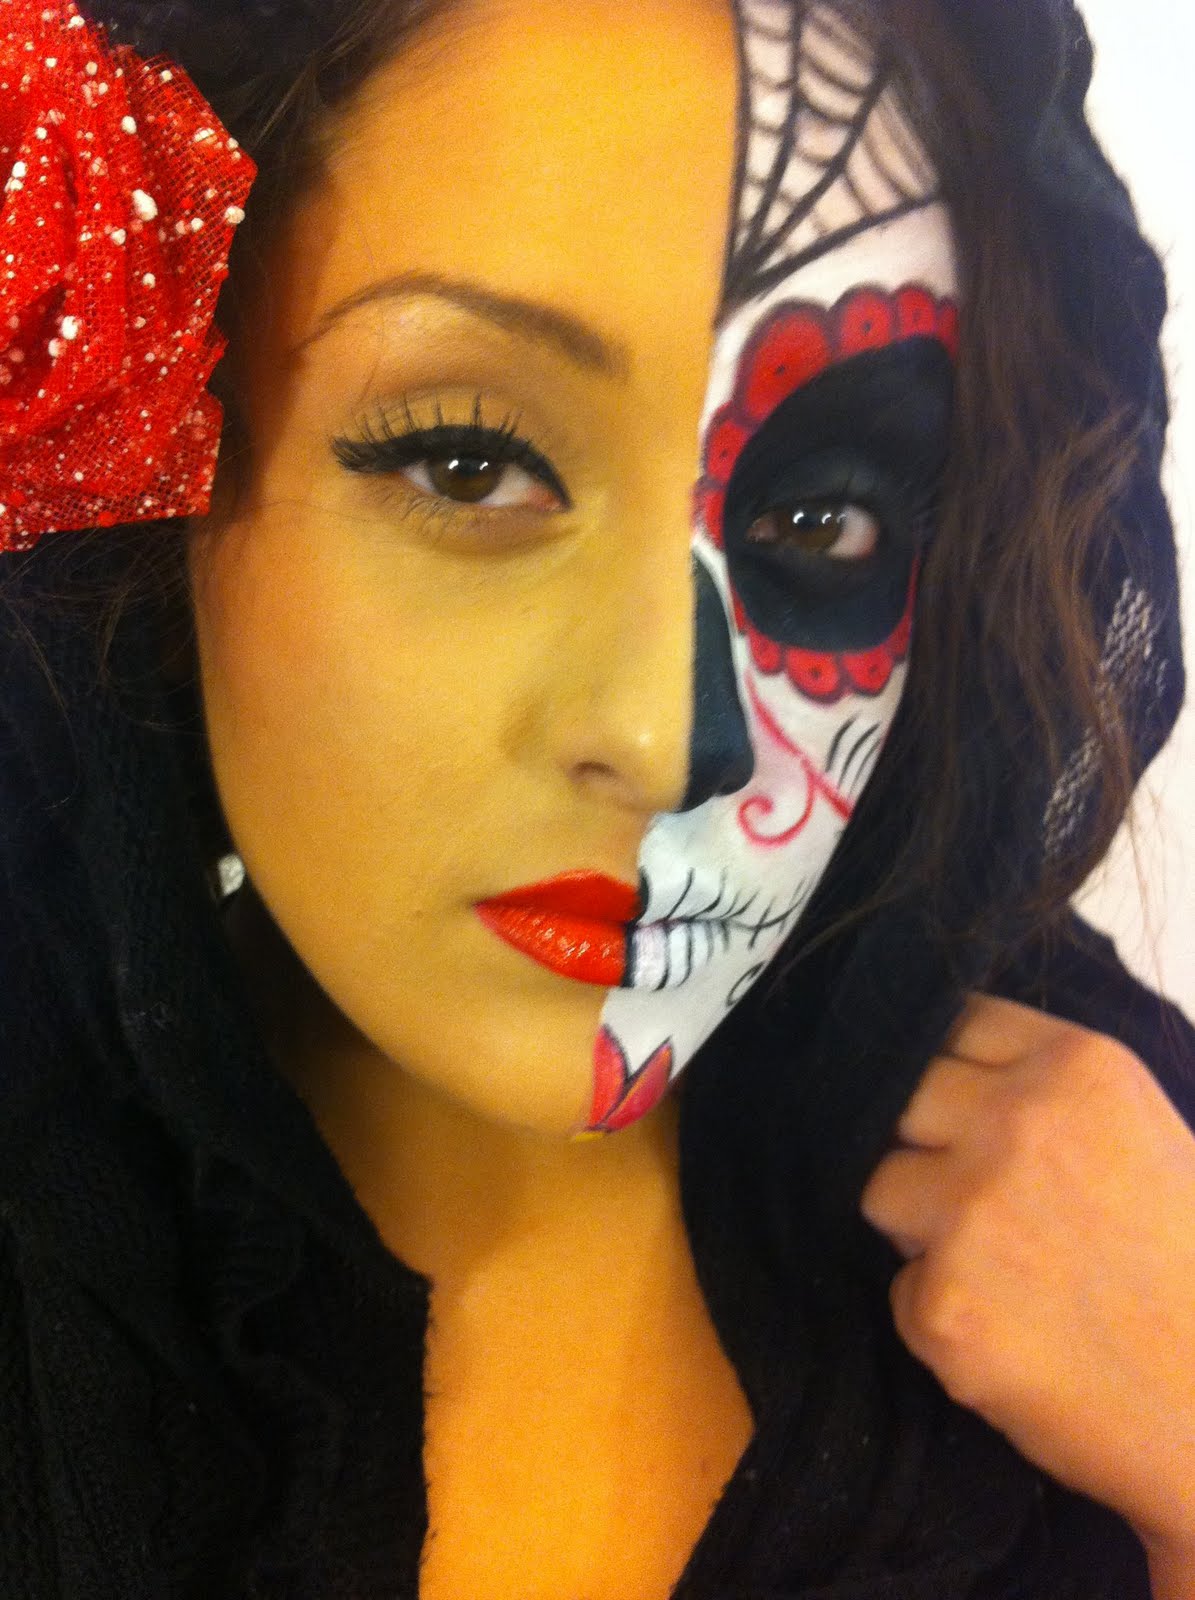 All things creative I adore you...: Dia De Los Muertos ( Day Of The Dead)